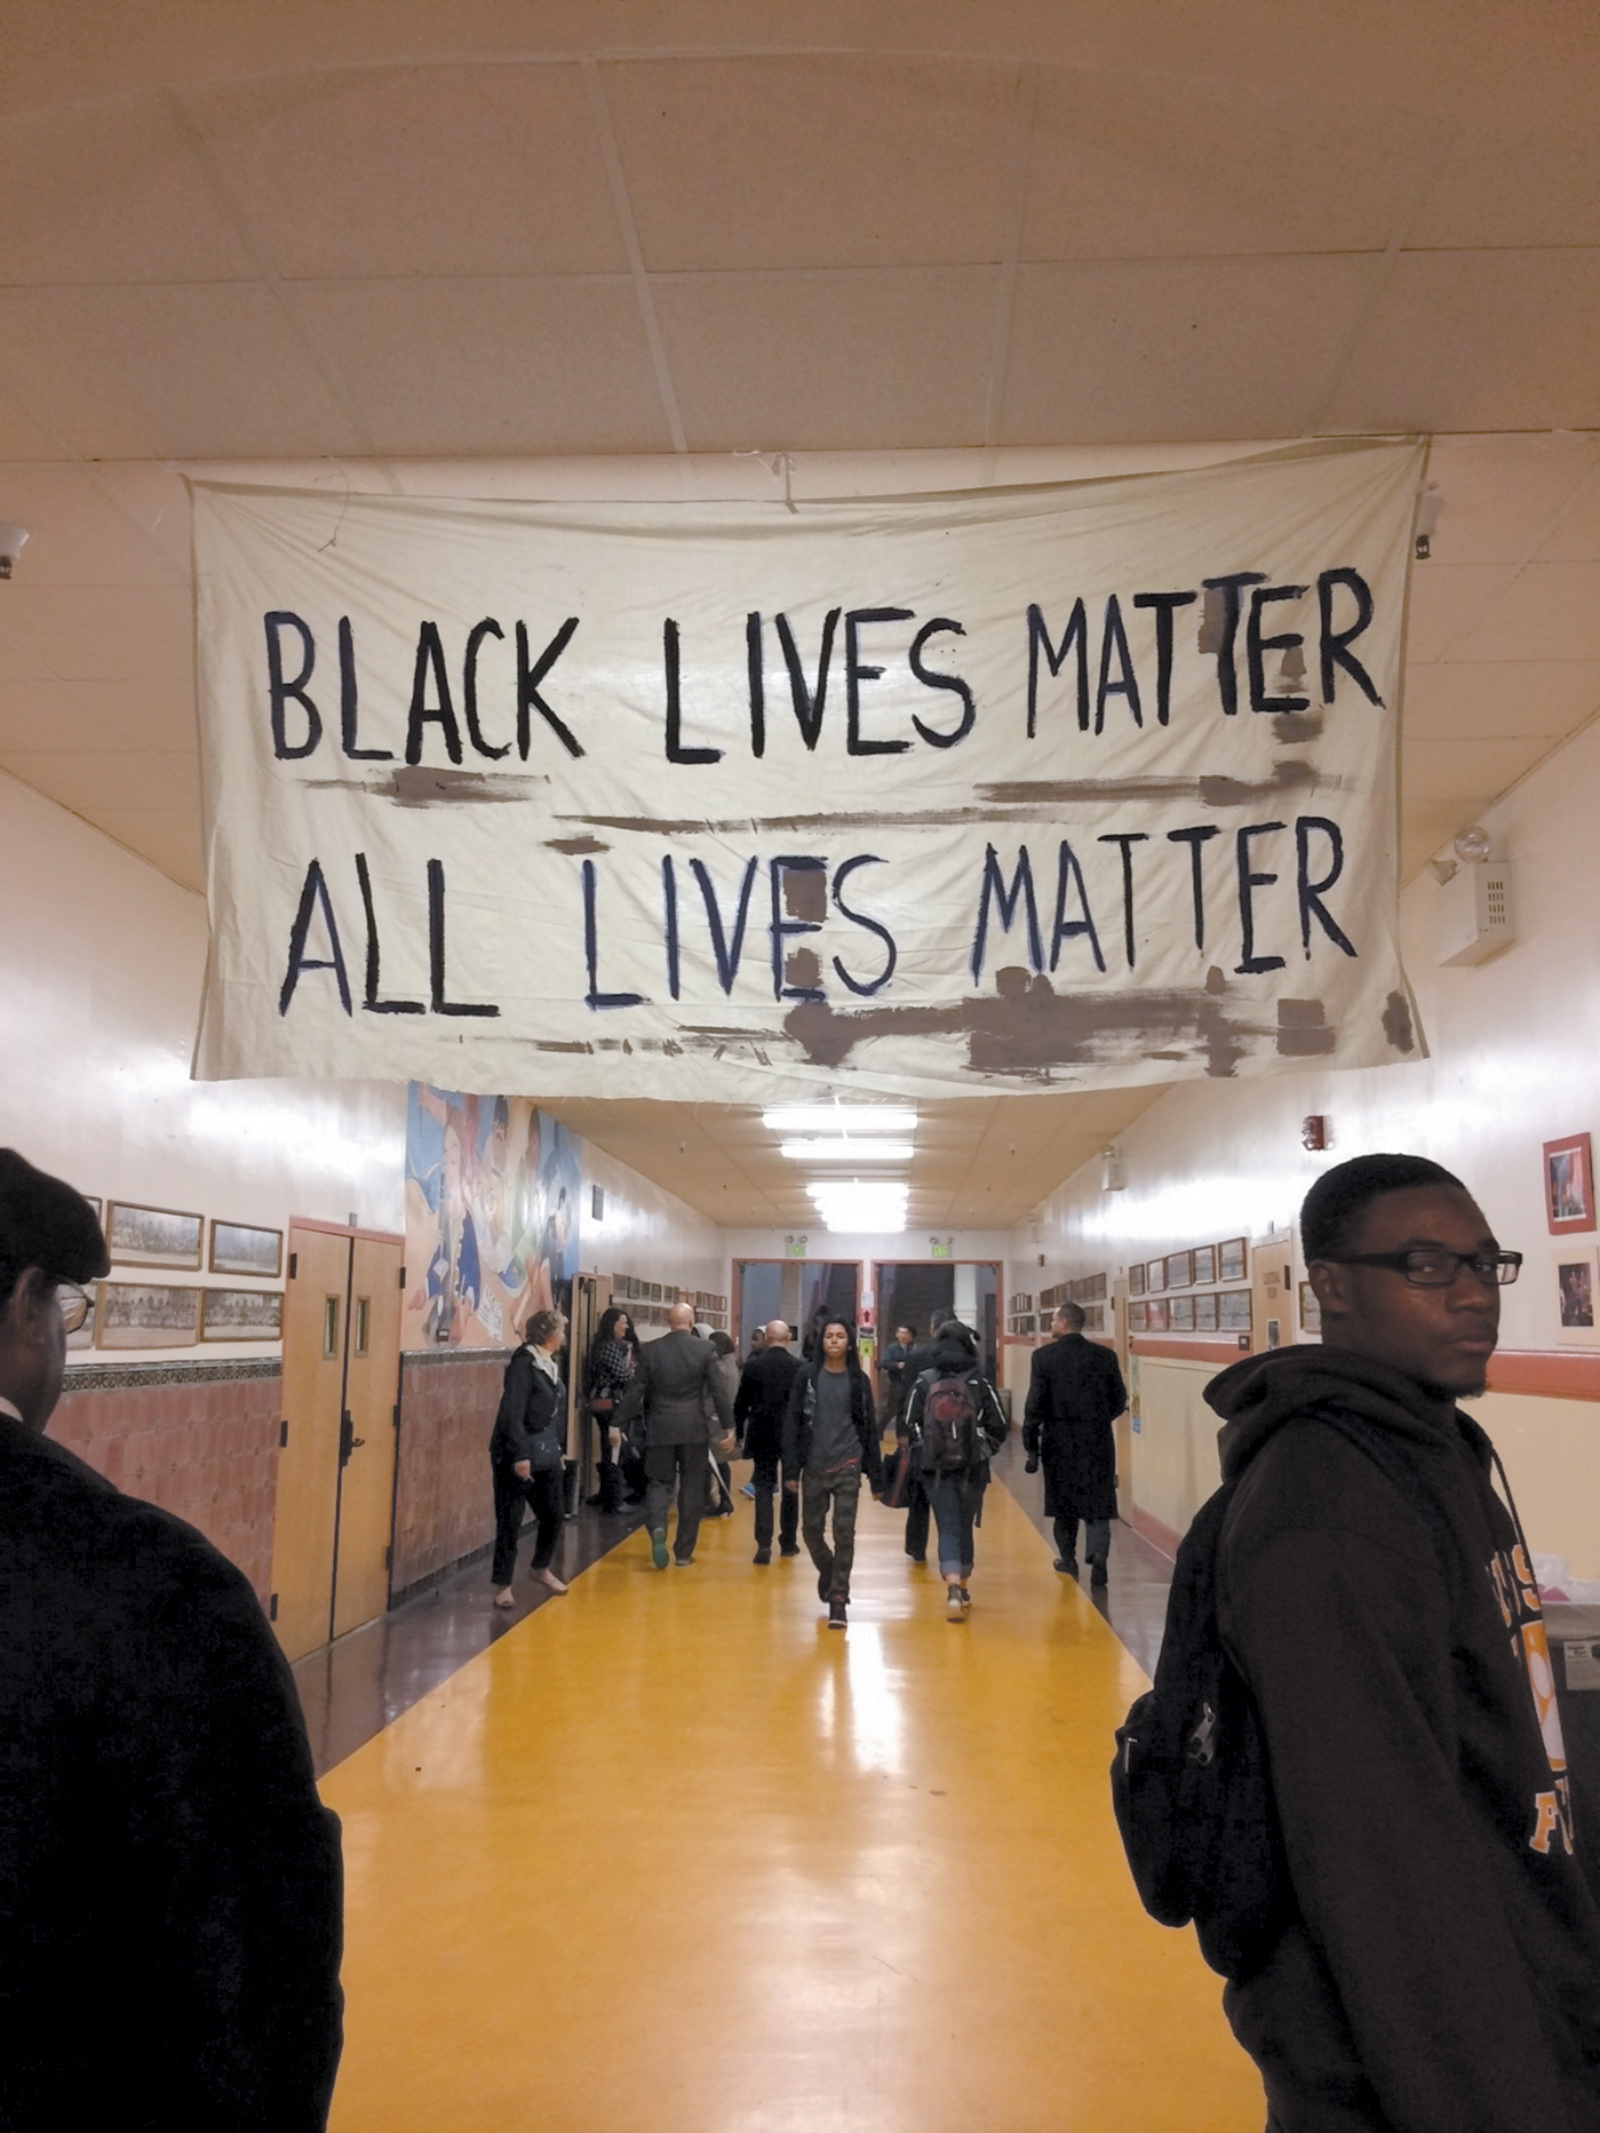 Students at Mission High School in San Francisco on the day of a forum for students citywide to discuss racial inequality and police brutality, December 2014. Organized by Mission High’s black student union and the NAACP, the panel included Michael Brown Sr., whose son was shot and killed by a police officer in Ferguson, Missouri, that summer.